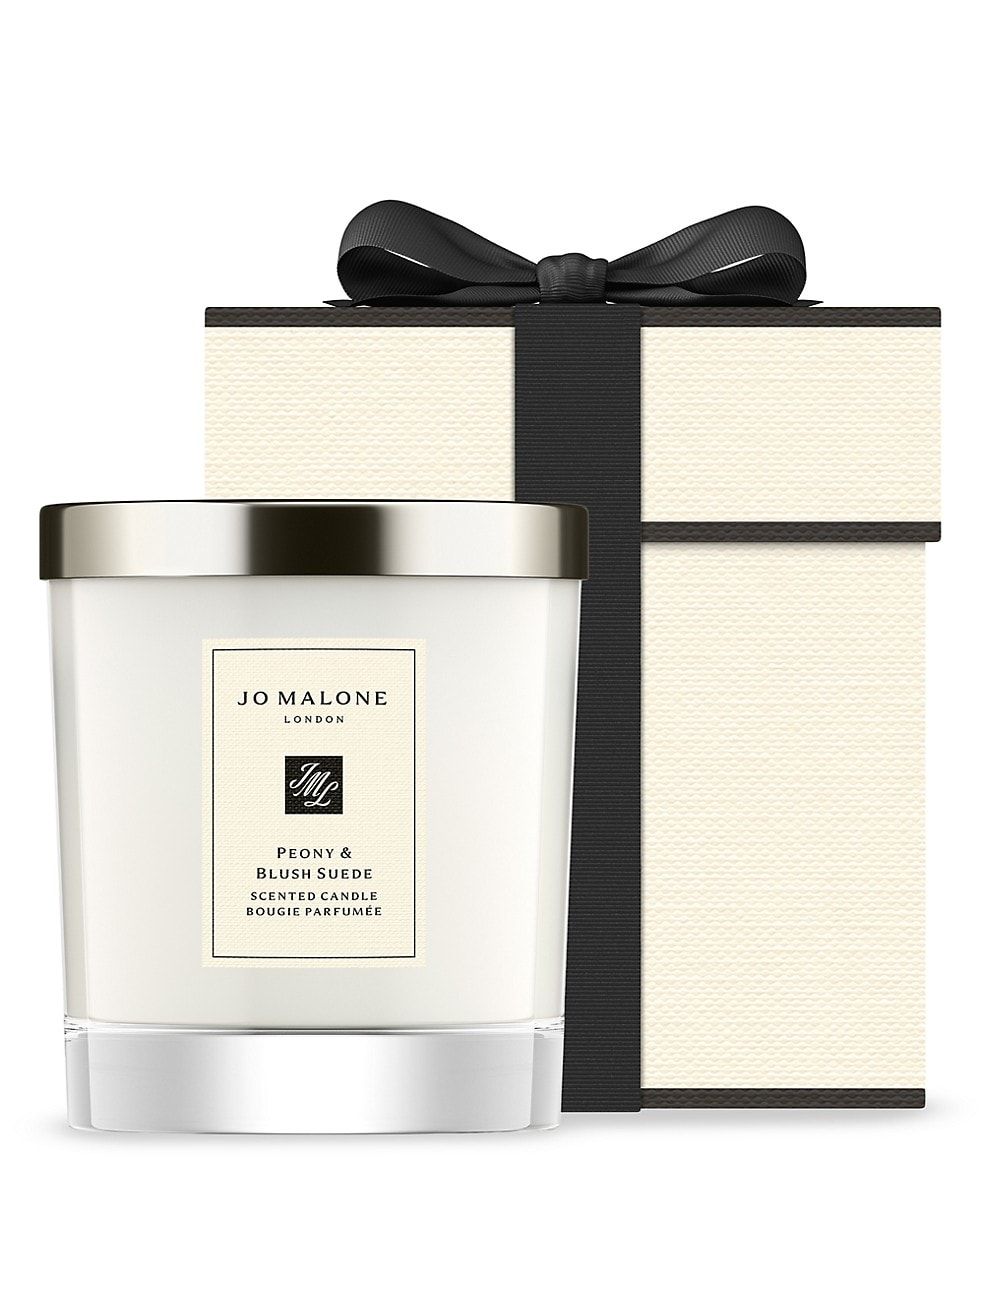 Jo Malone London Peony & Blush Suede Home Candle | Saks Fifth Avenue (UK)